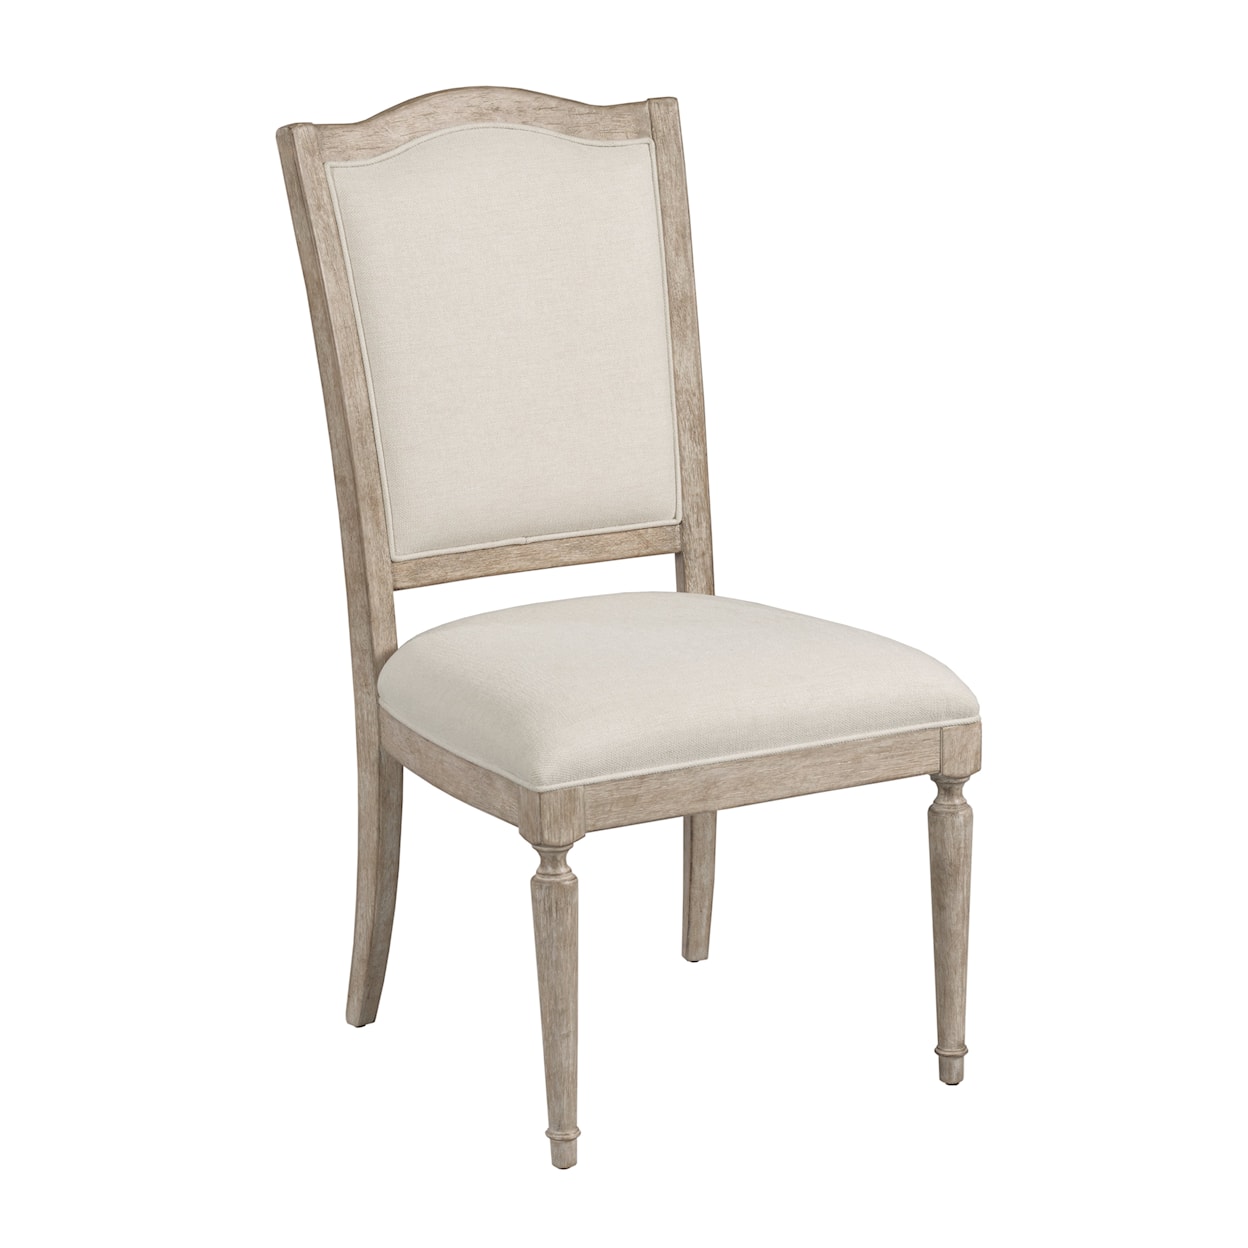 American Drew Cambric Upholstered Side Chair